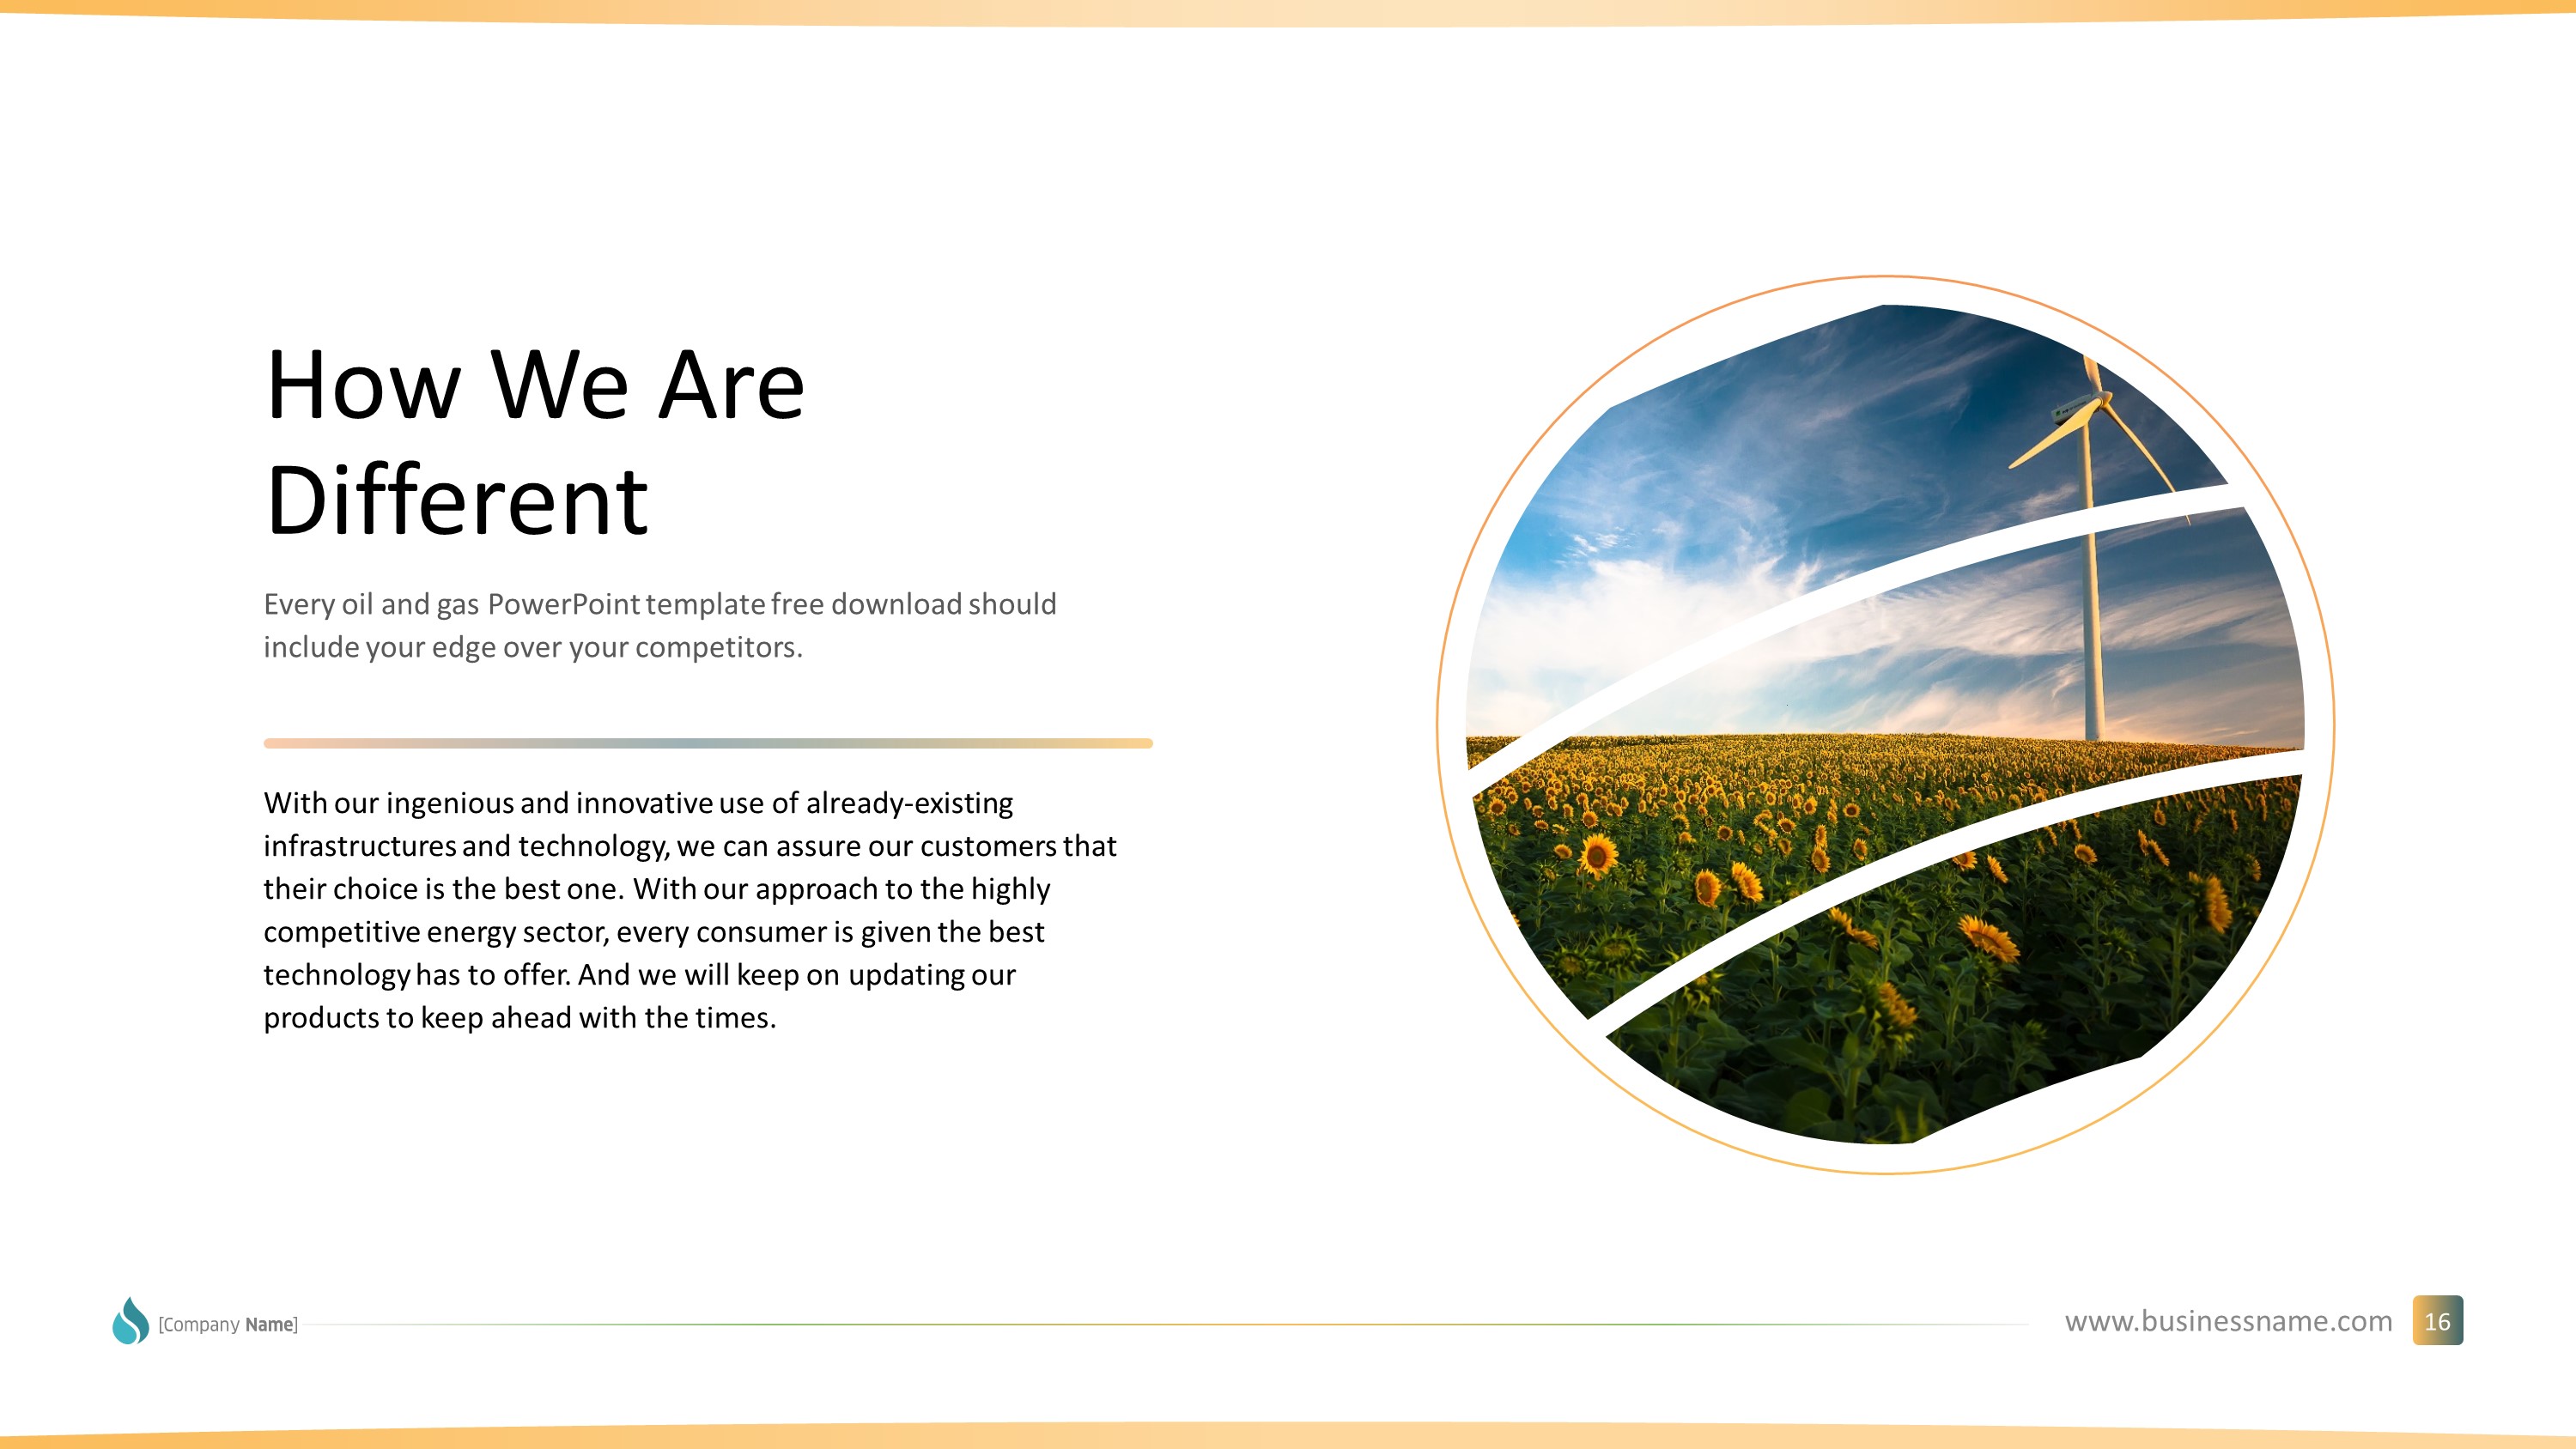 26731_Renewable_Energy_Premium_PowerPoint_Template_Slide_16_How_We_Are_Different